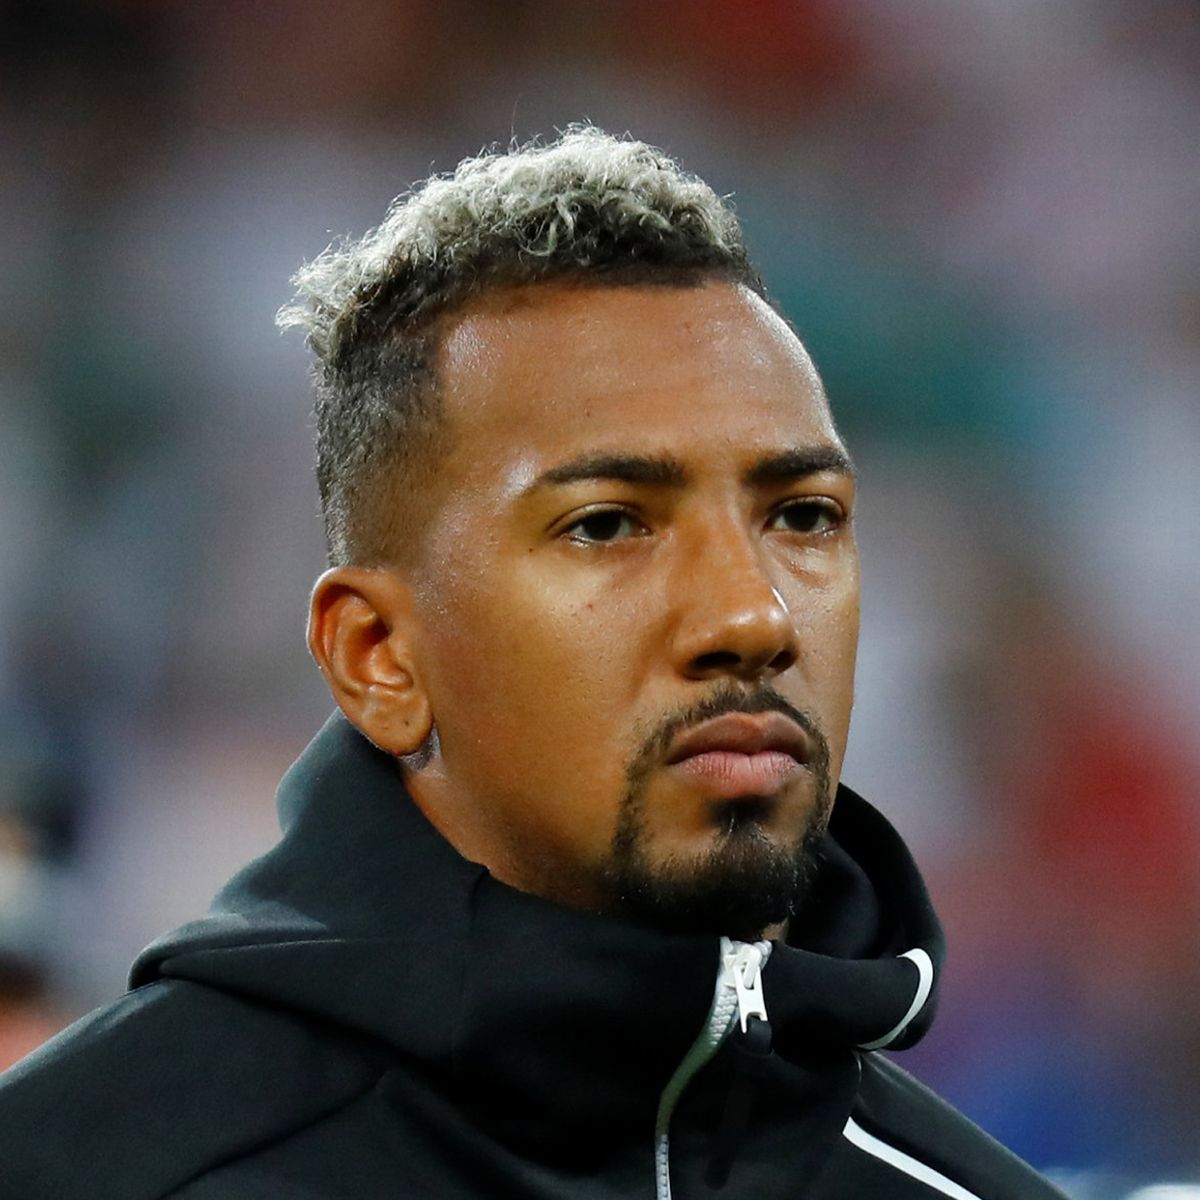 Boateng To Face Charges Over Alleged Assault On Ex-Girlfriend